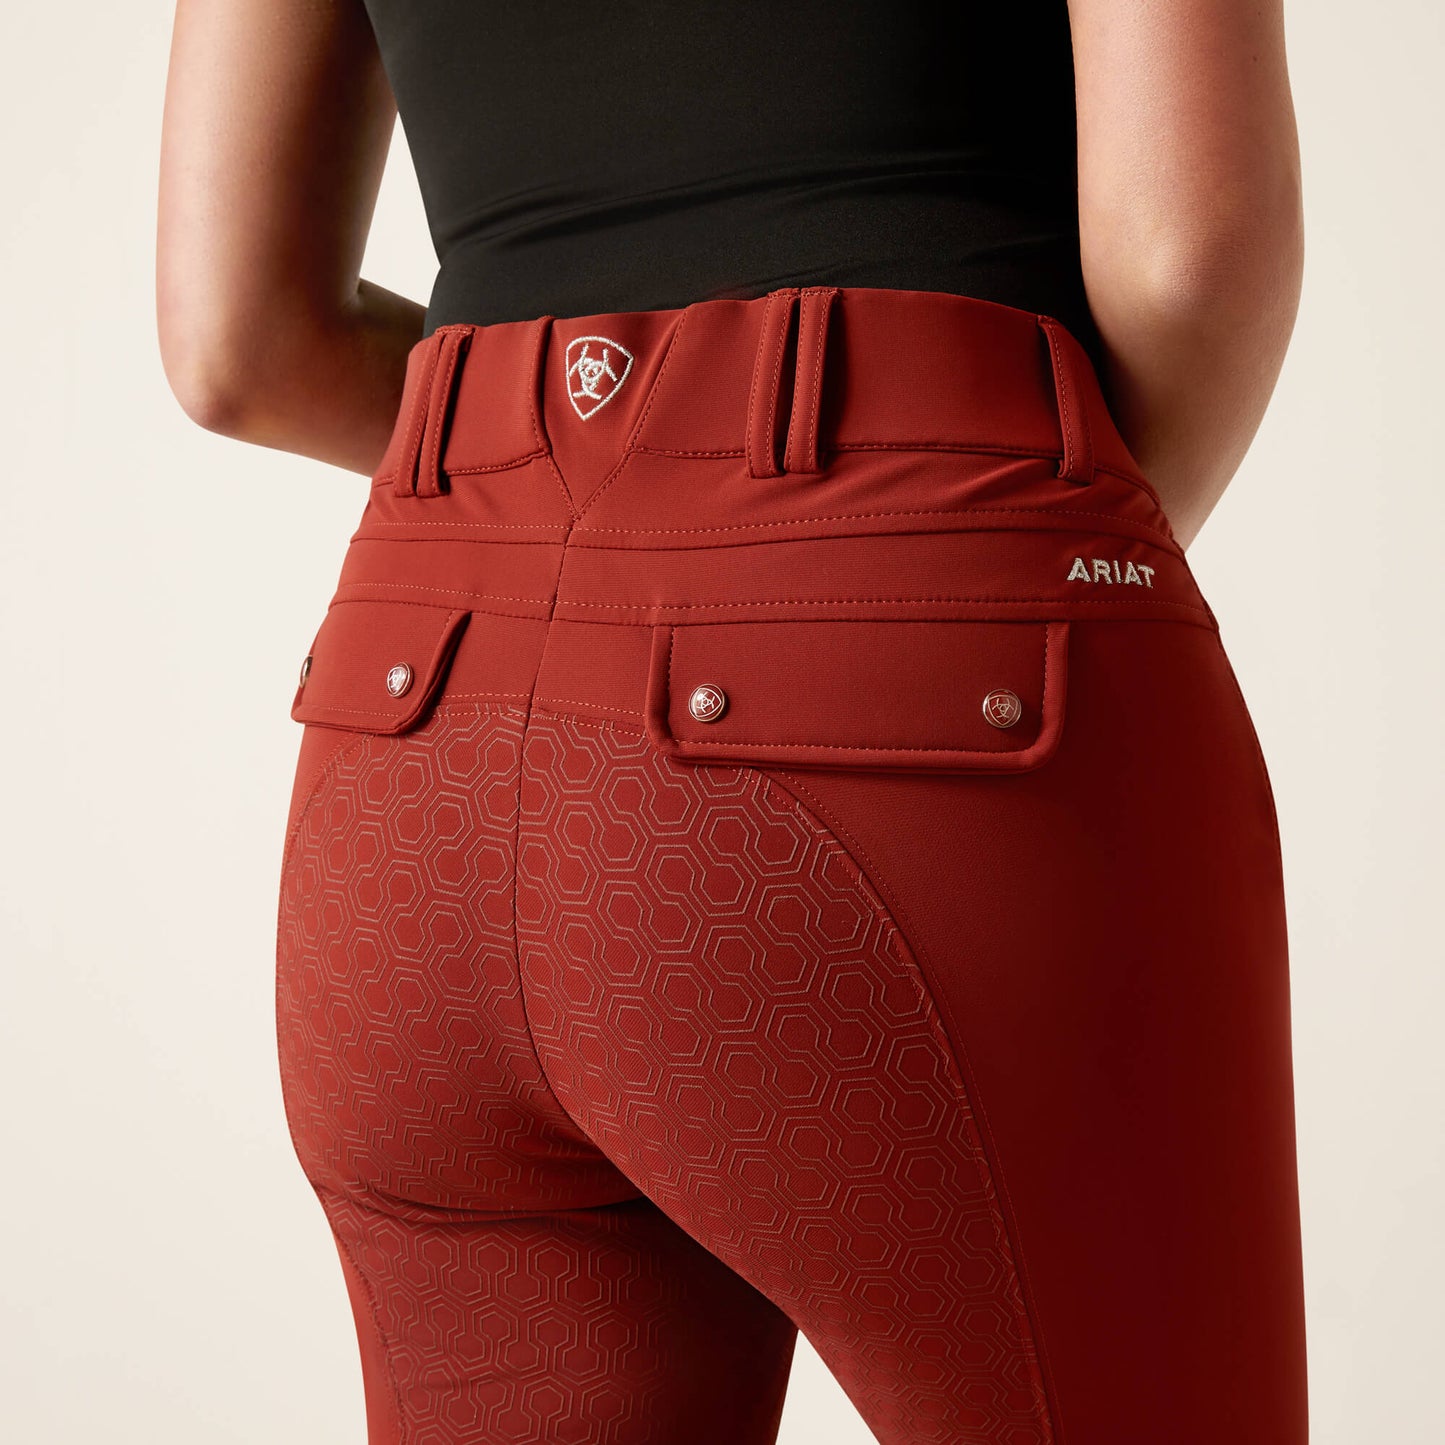 Ariat Fired Brick Tri-Factor Grip Breeches with Full Silicone Seat